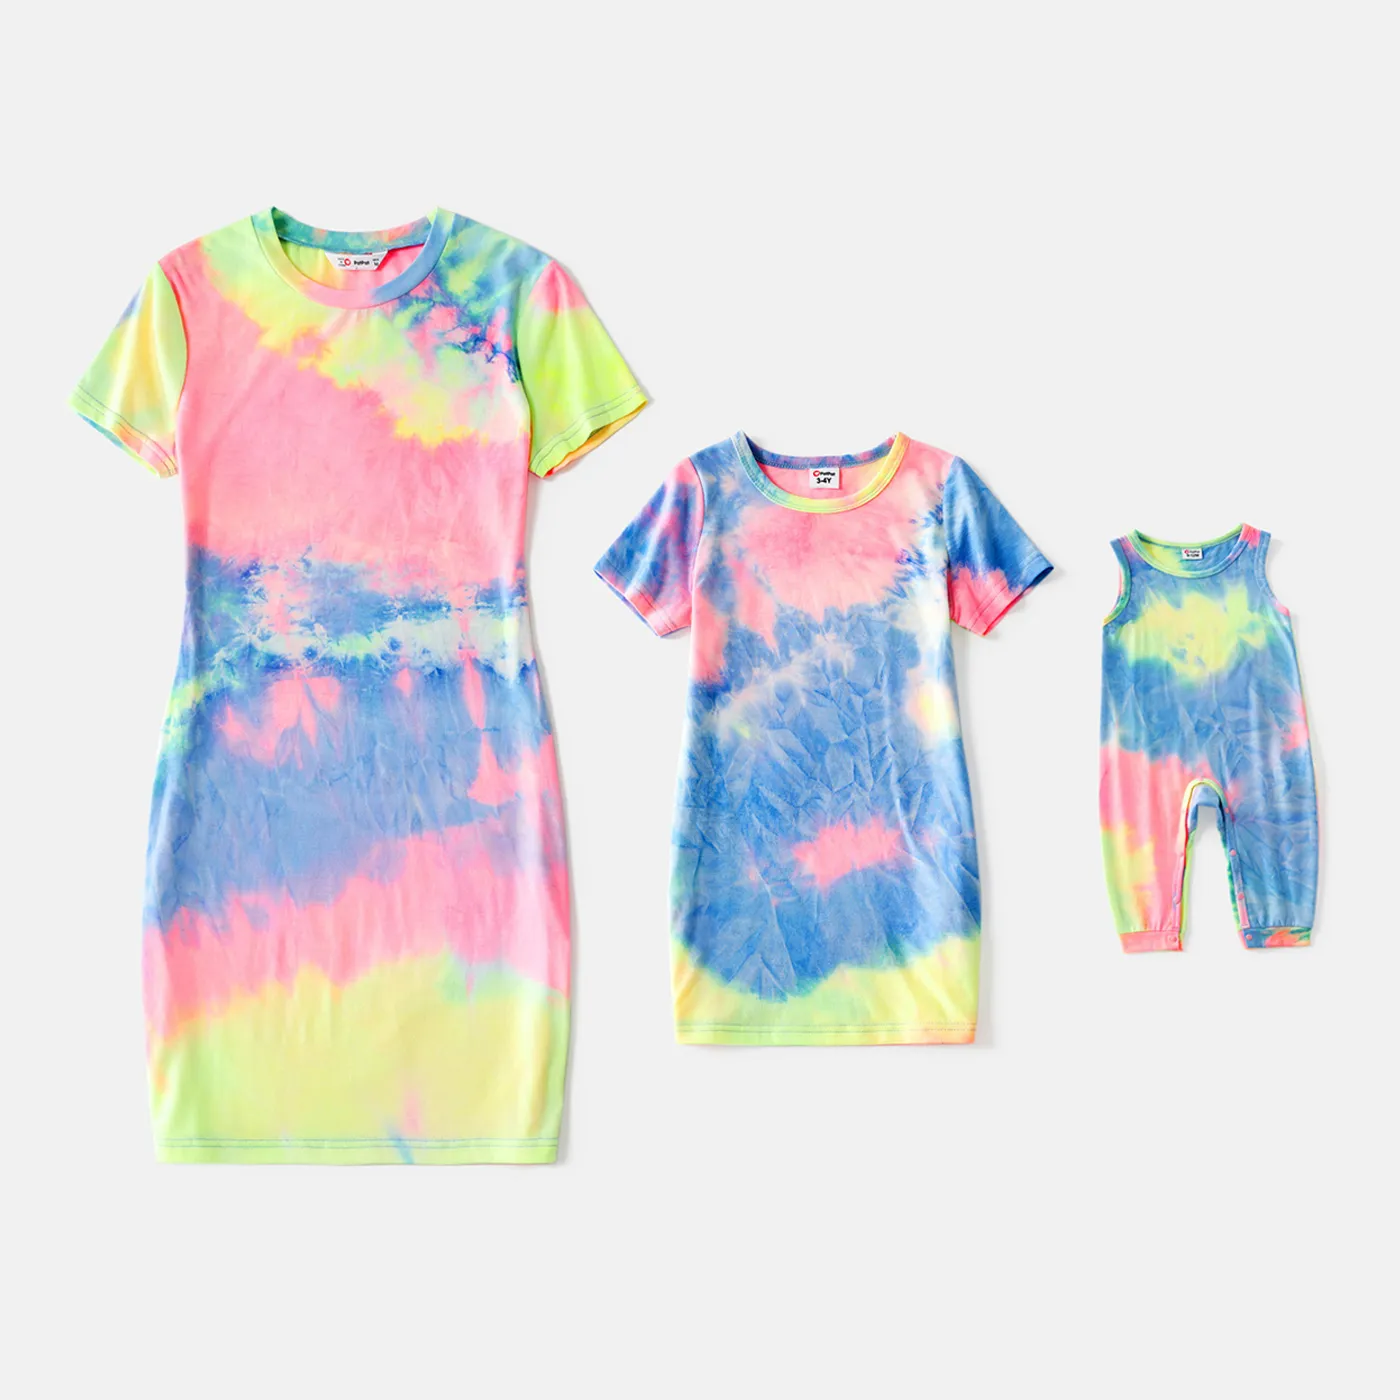 Allover Tie Dye Short Sleeve Slim Fit Mini T-shirt Dress for Mom and Me